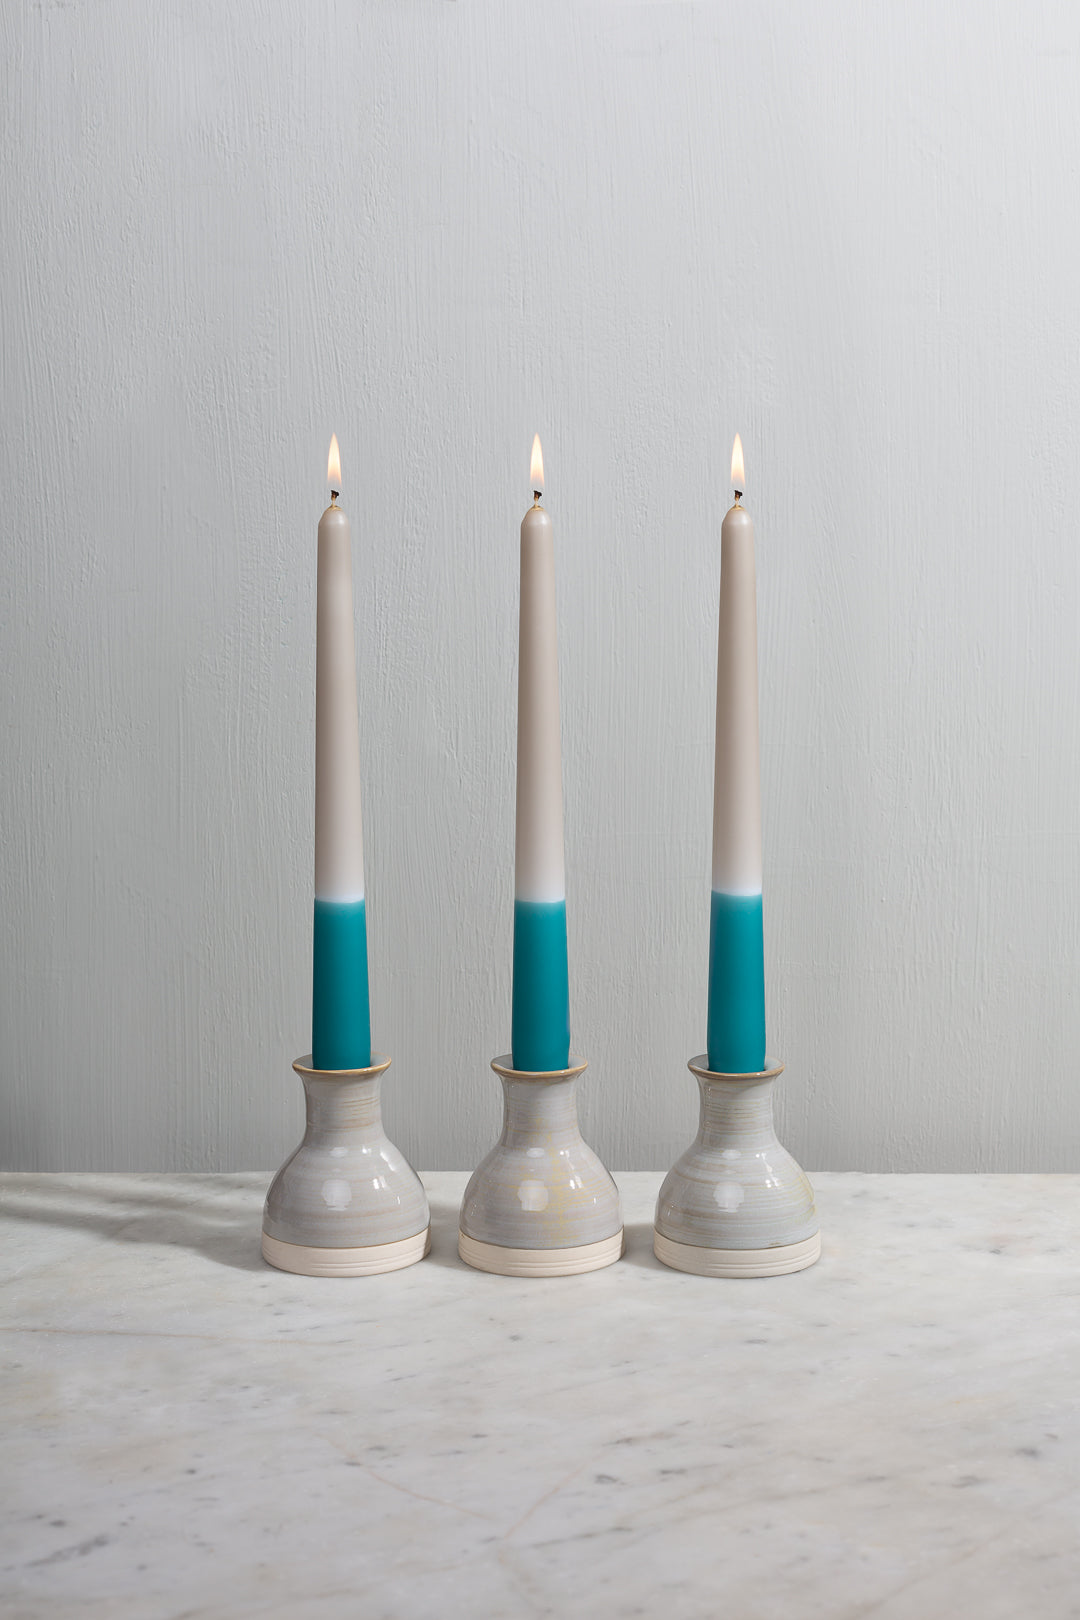 Teal tapered dinner candles. Dip dyed by hand. Made in England. 100% vegan wax.